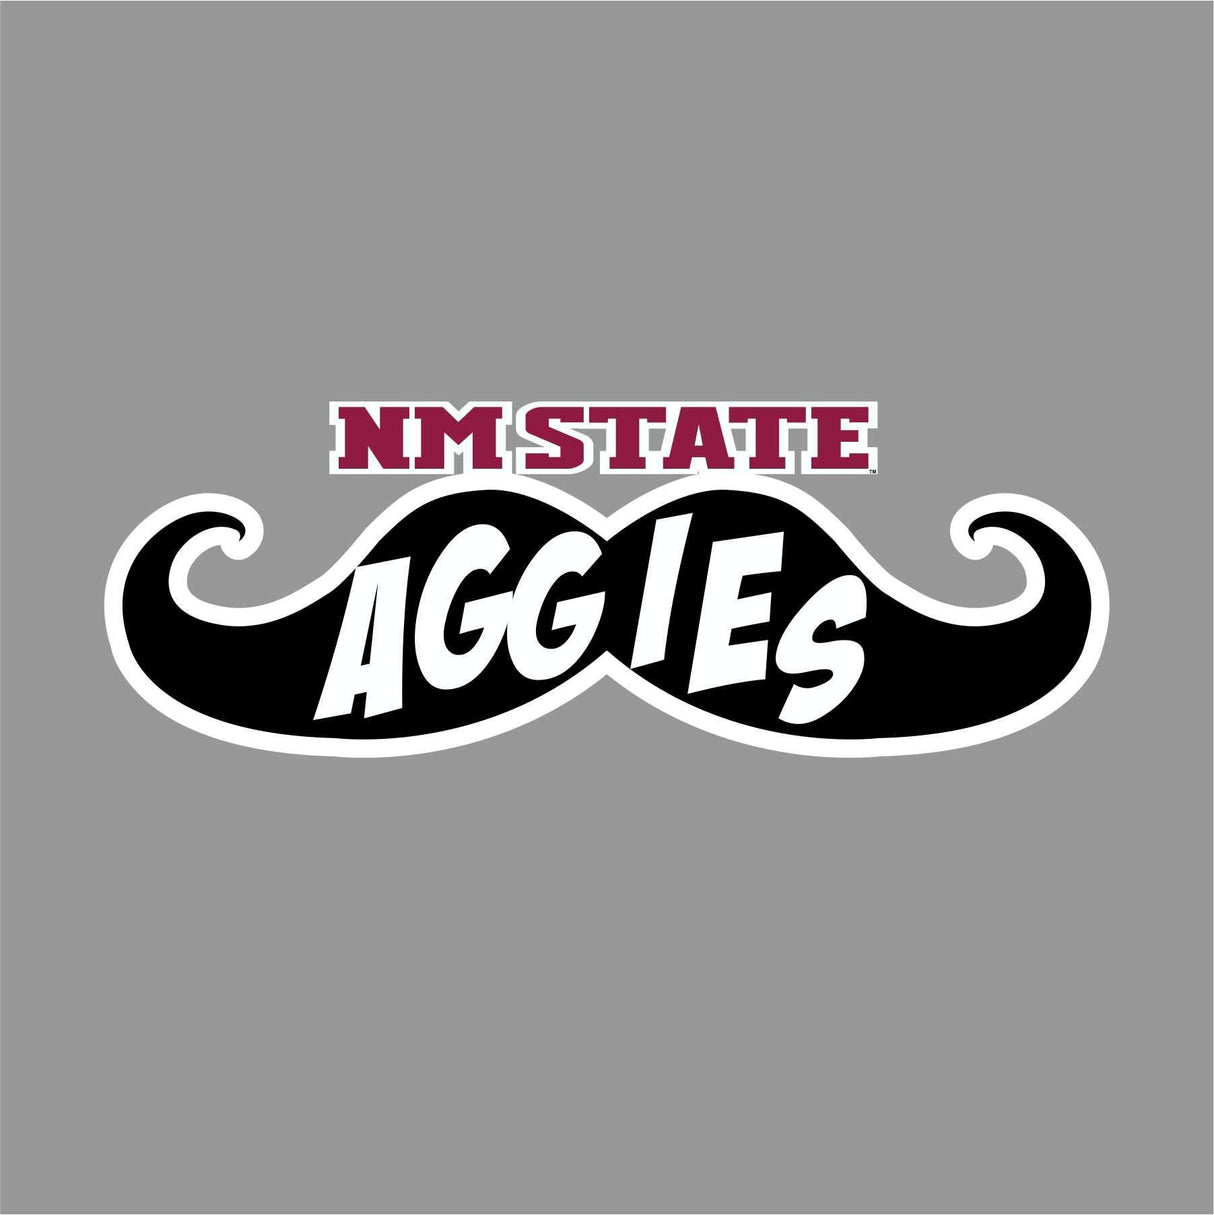 NM State Aggies 'Stache Decal